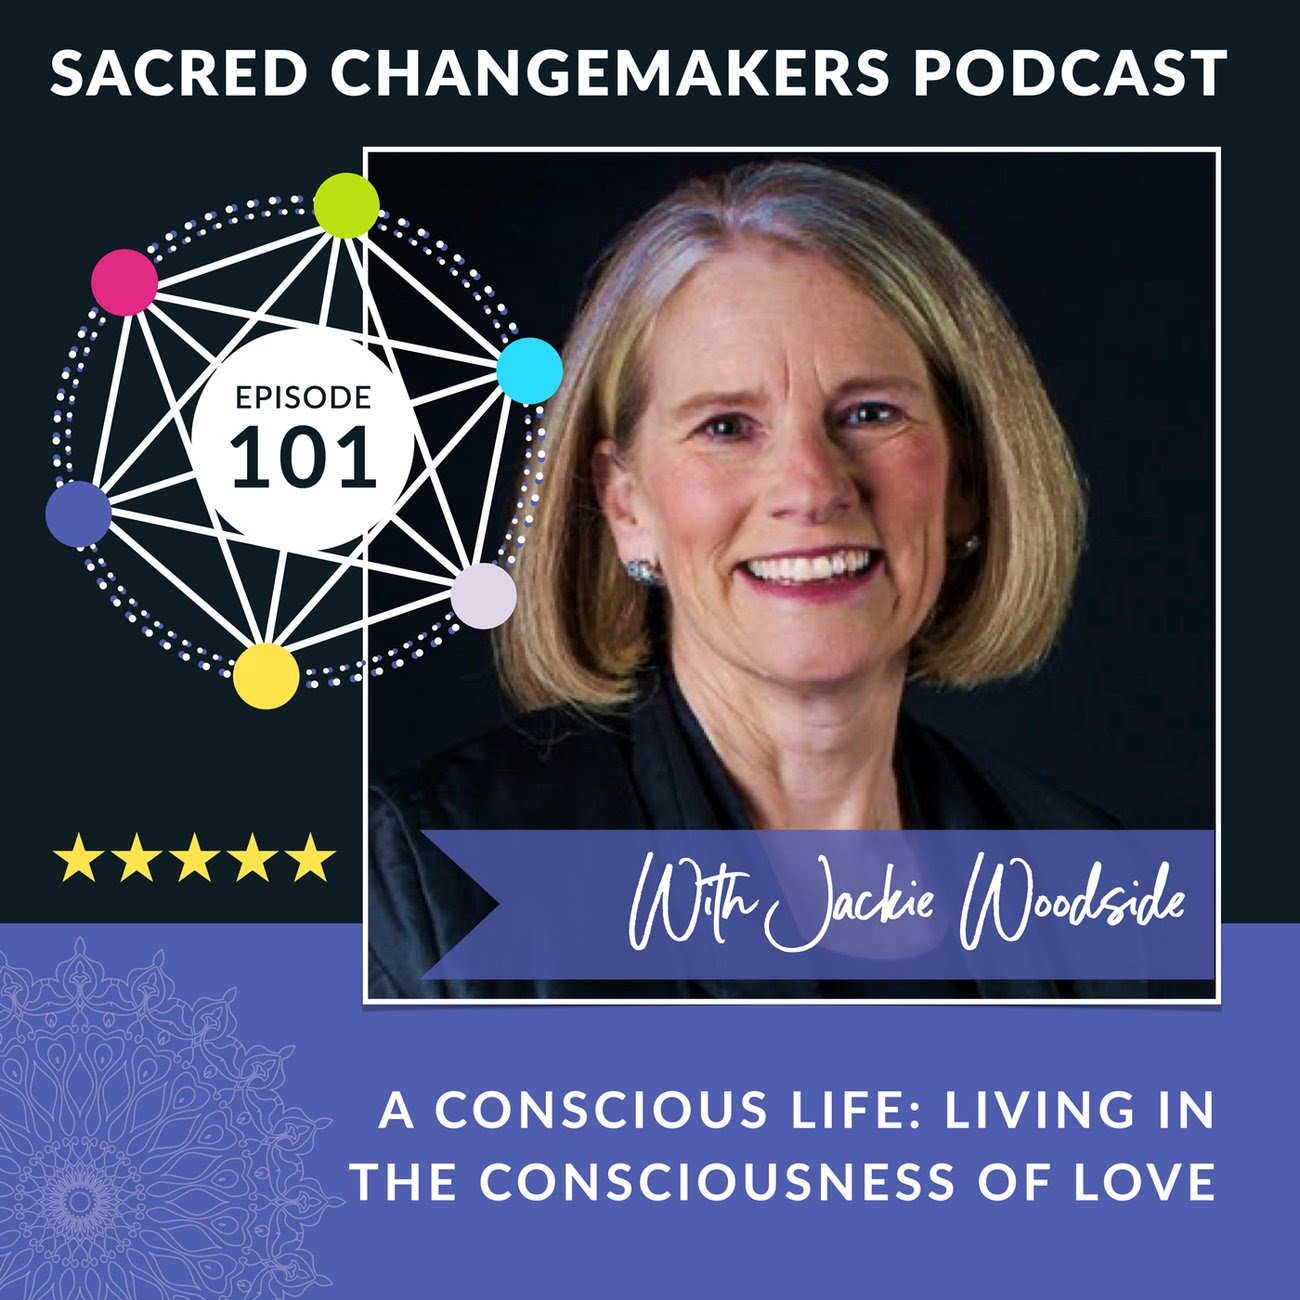 A Conscious Life: Living In The Consciousness Of Love